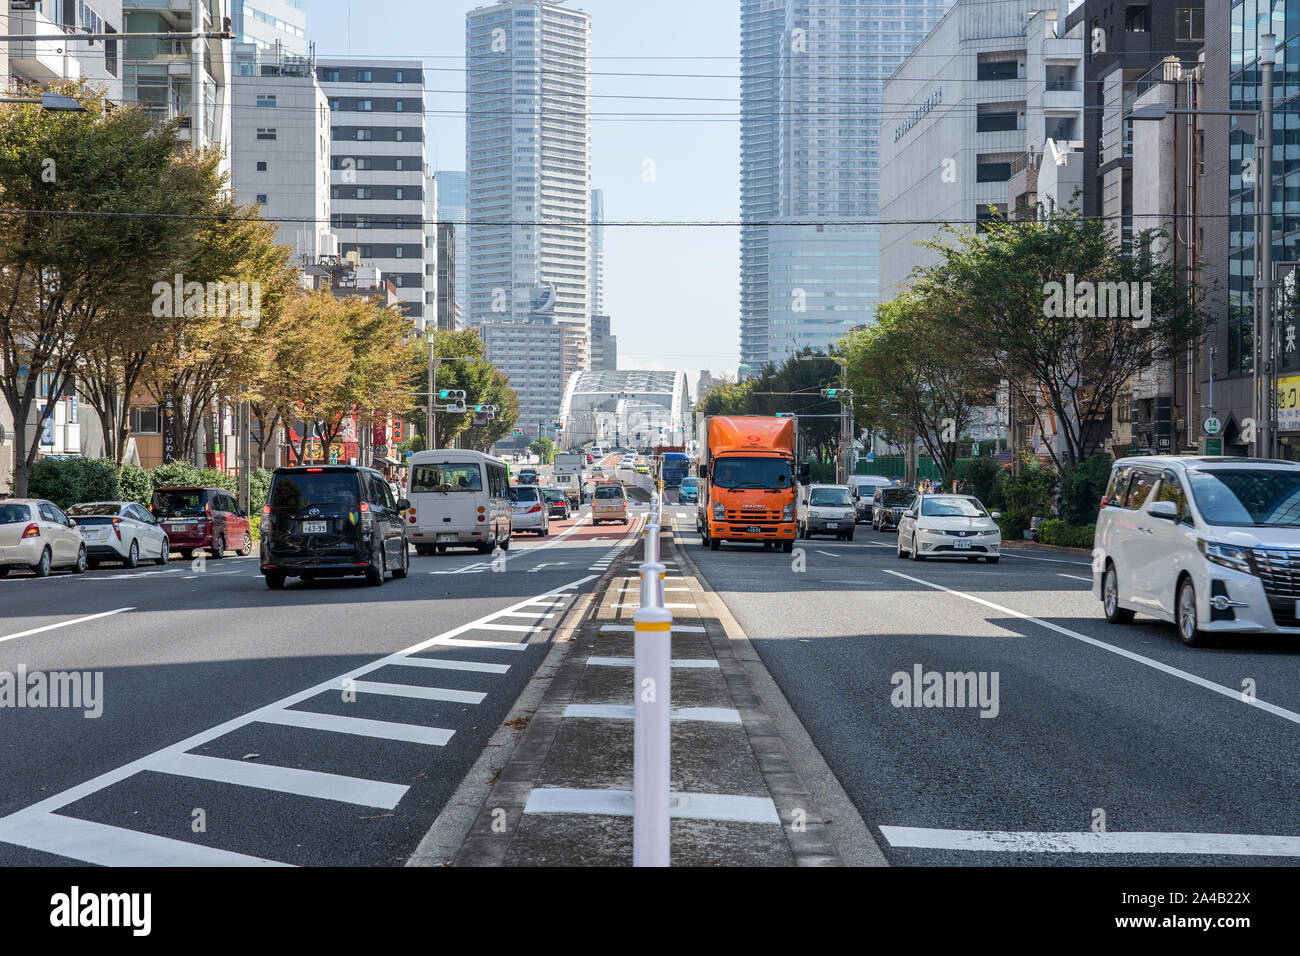 TOKYO, JAPAN - OCTOBER 6, 2018. The Central Perspective View Of Busy Road Full Of Cars And Trucks In Tokyo. The Middle View Of Street In A Japanese Ci Stock Photo